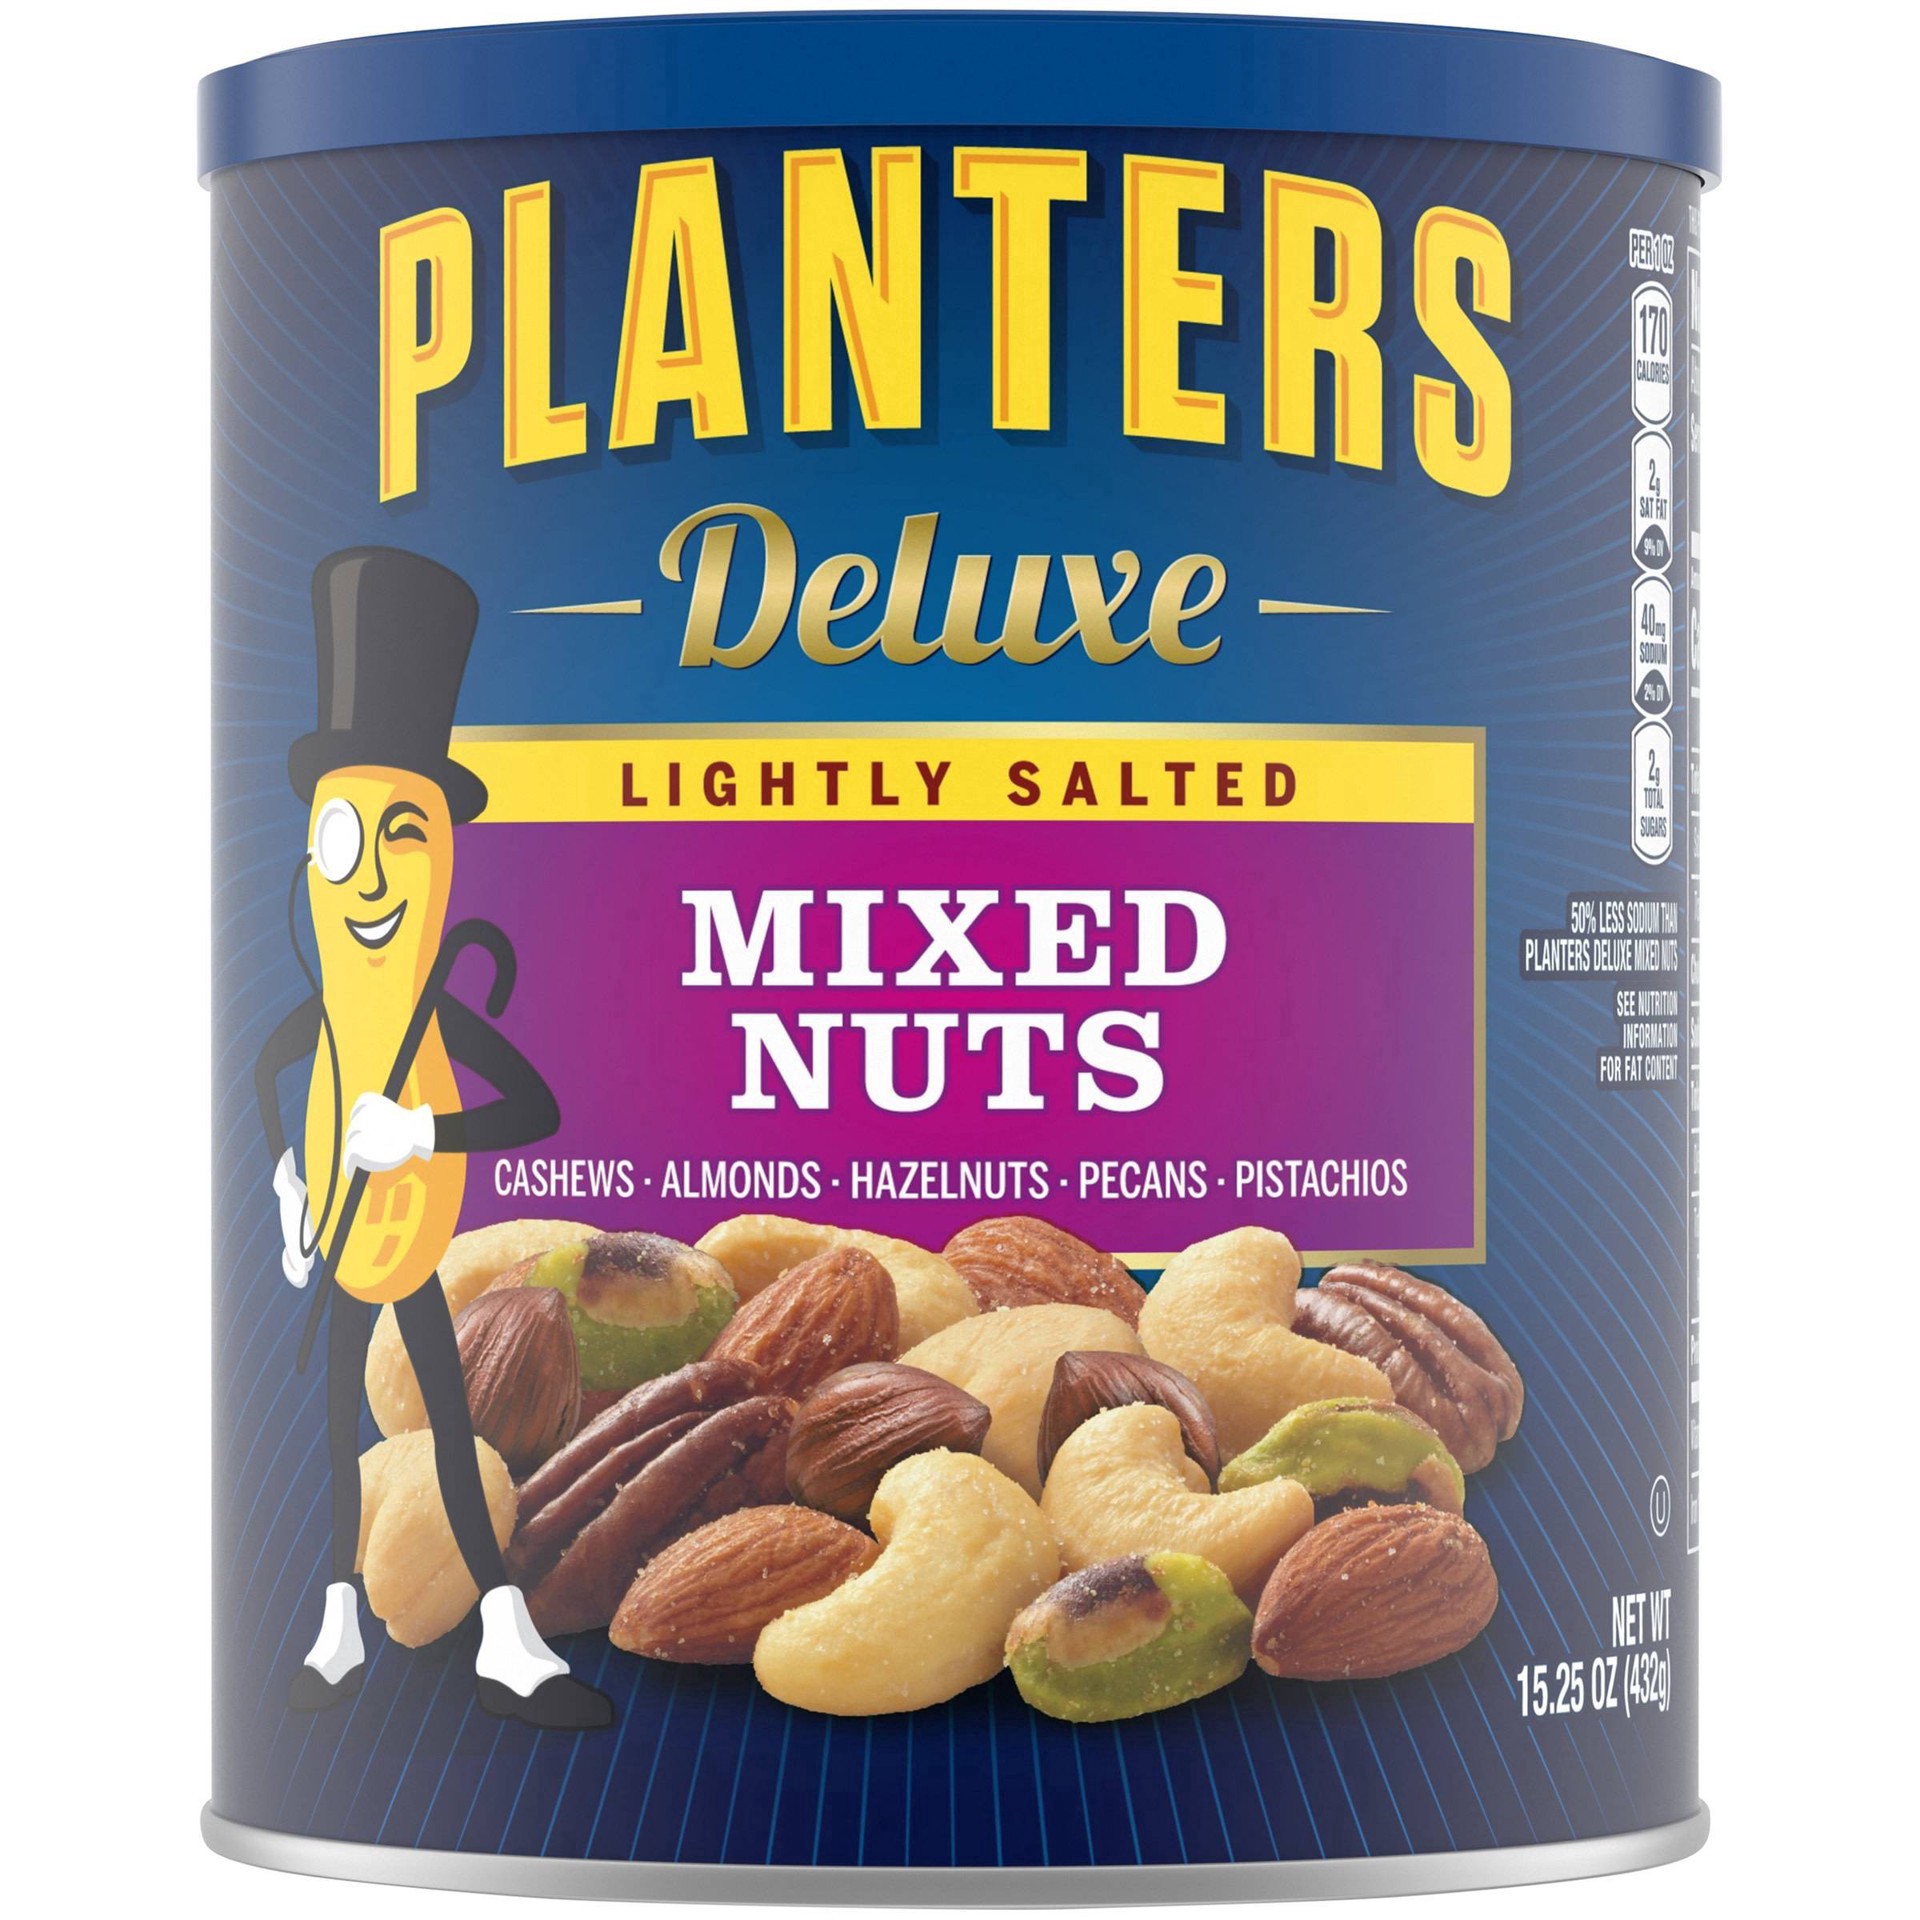 slide 20 of 46, Planters Deluxe Lightly Salted Mixed Nuts 15.25 oz, 15.25 oz